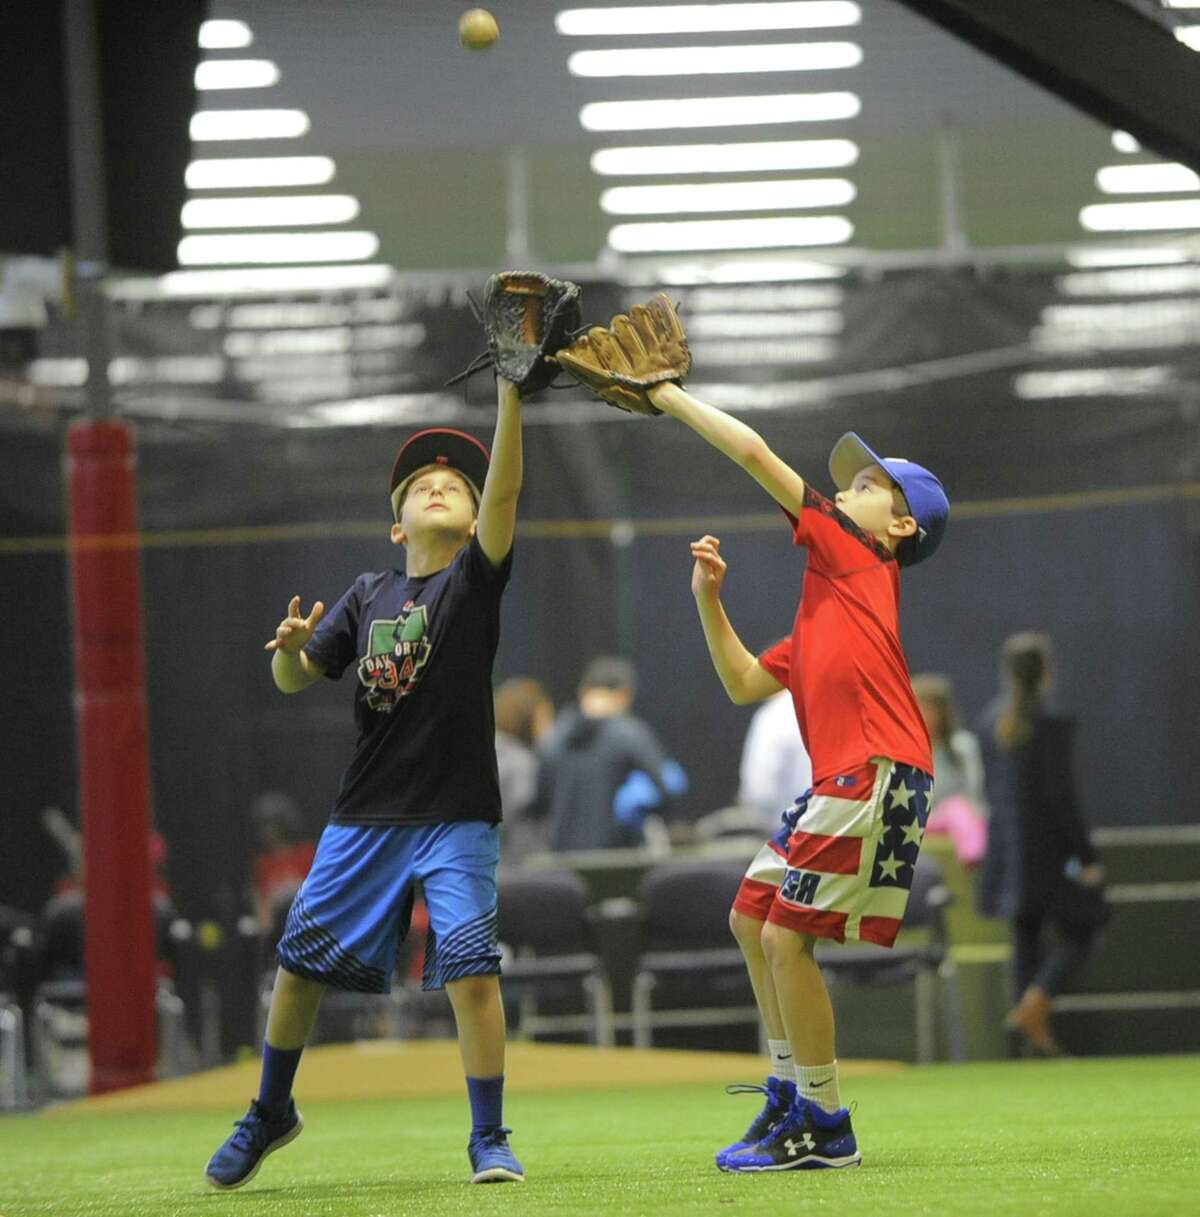 Matthew Goodman, 11, of Stamford and Georgie Childs, 11, of Darien participate in a baseball skills clinic at the new Bobby Valentine's Sports Academy complex in Stamford, Conn. on March 17, 2017. The newly opened State of the Art indoor baseball teaching facility accommodates a full size Major League infield diamond, batting and pitching cages, as well as a workout weight room and gym.